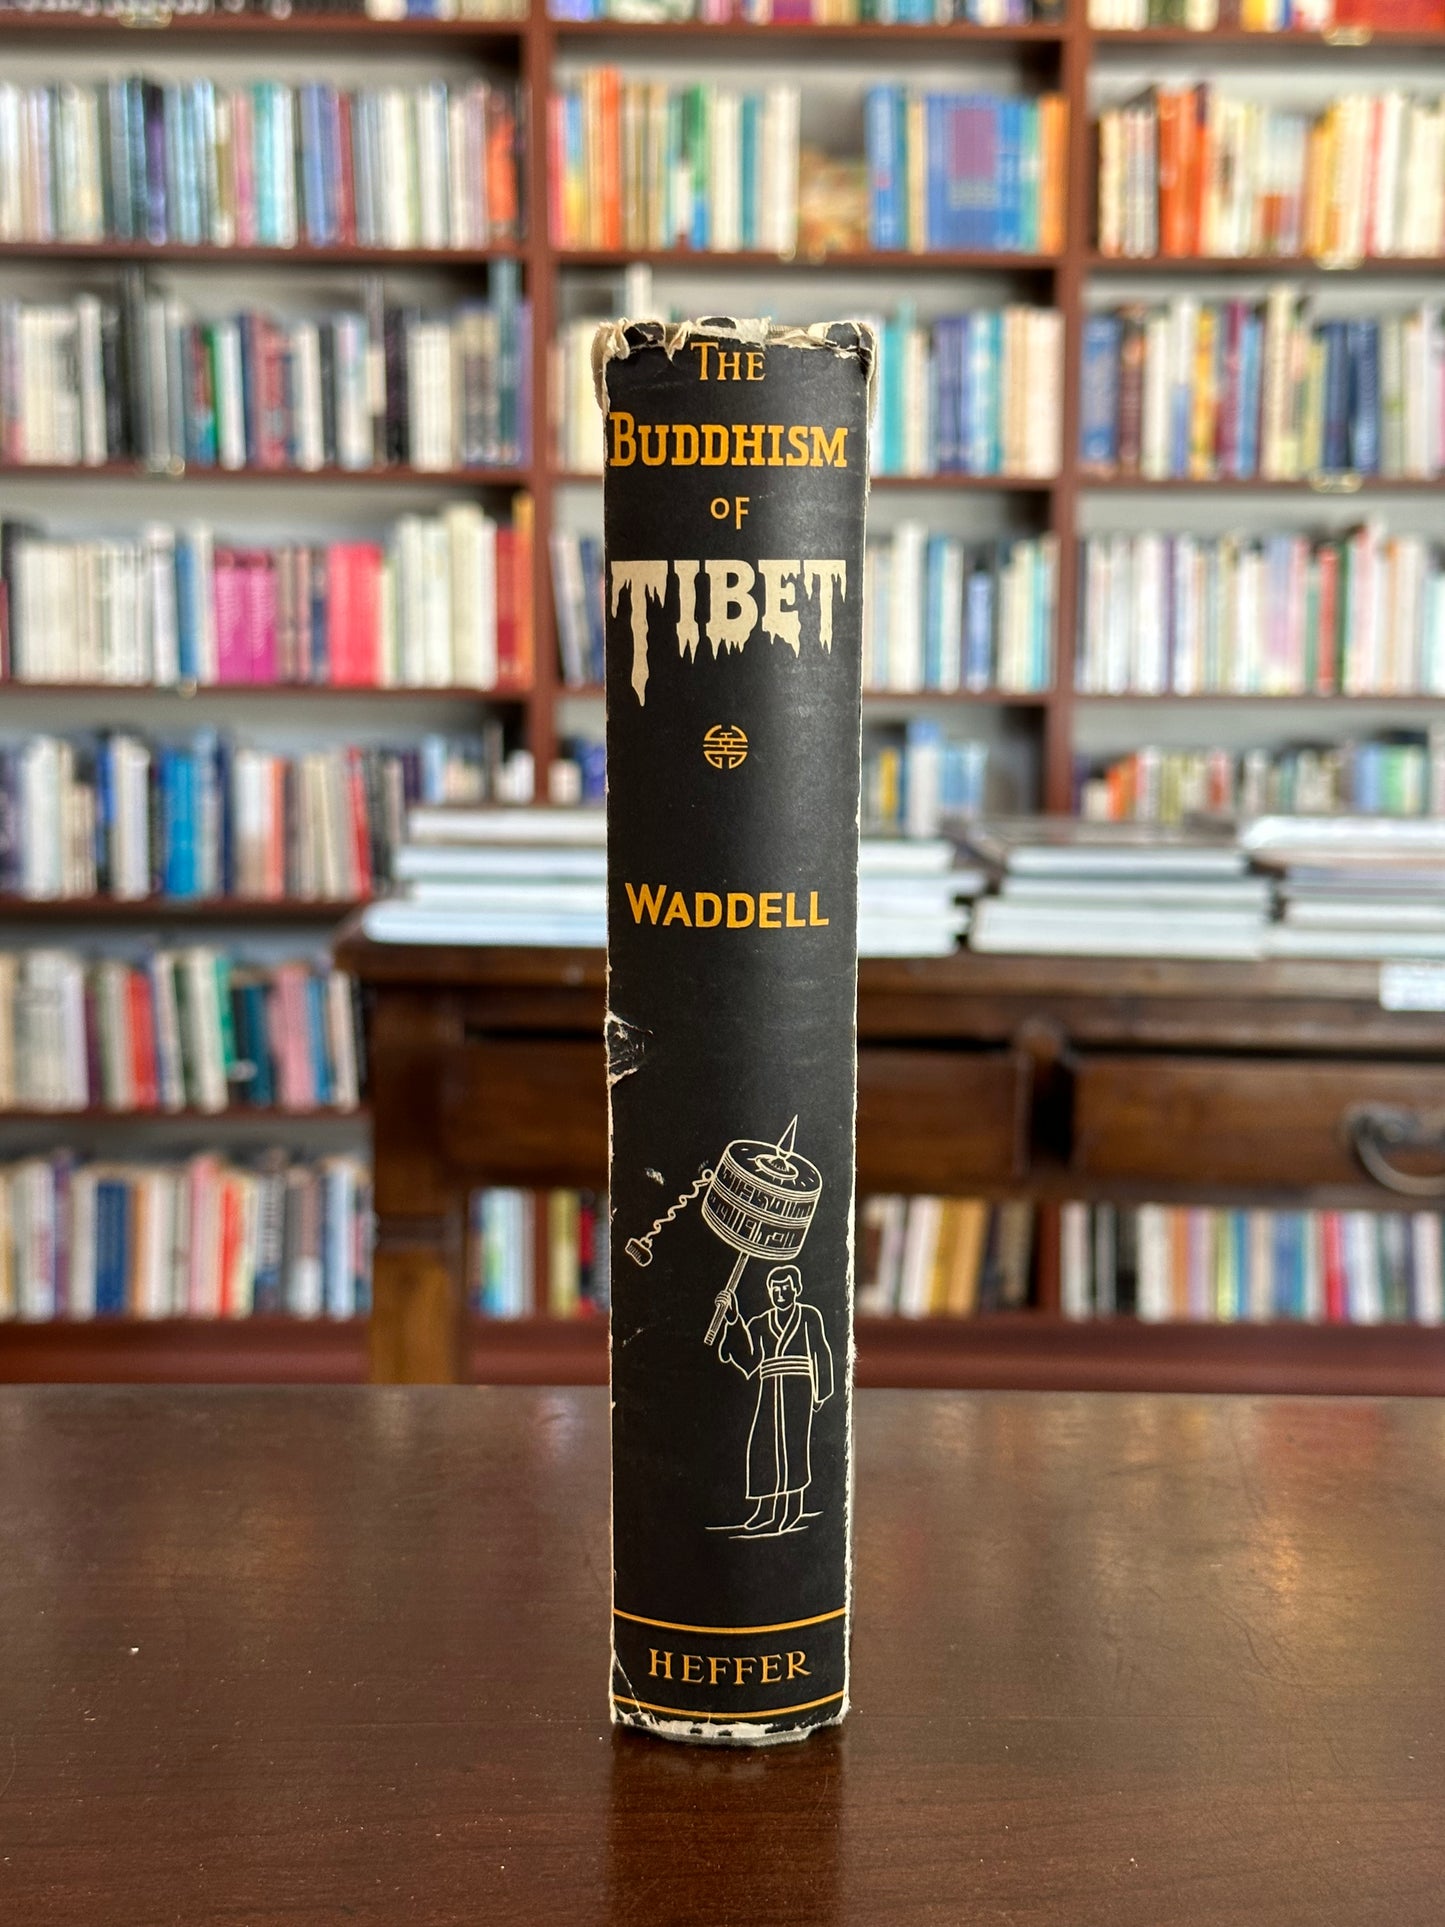 The Buddhism of Tibet by L.A. Waddell